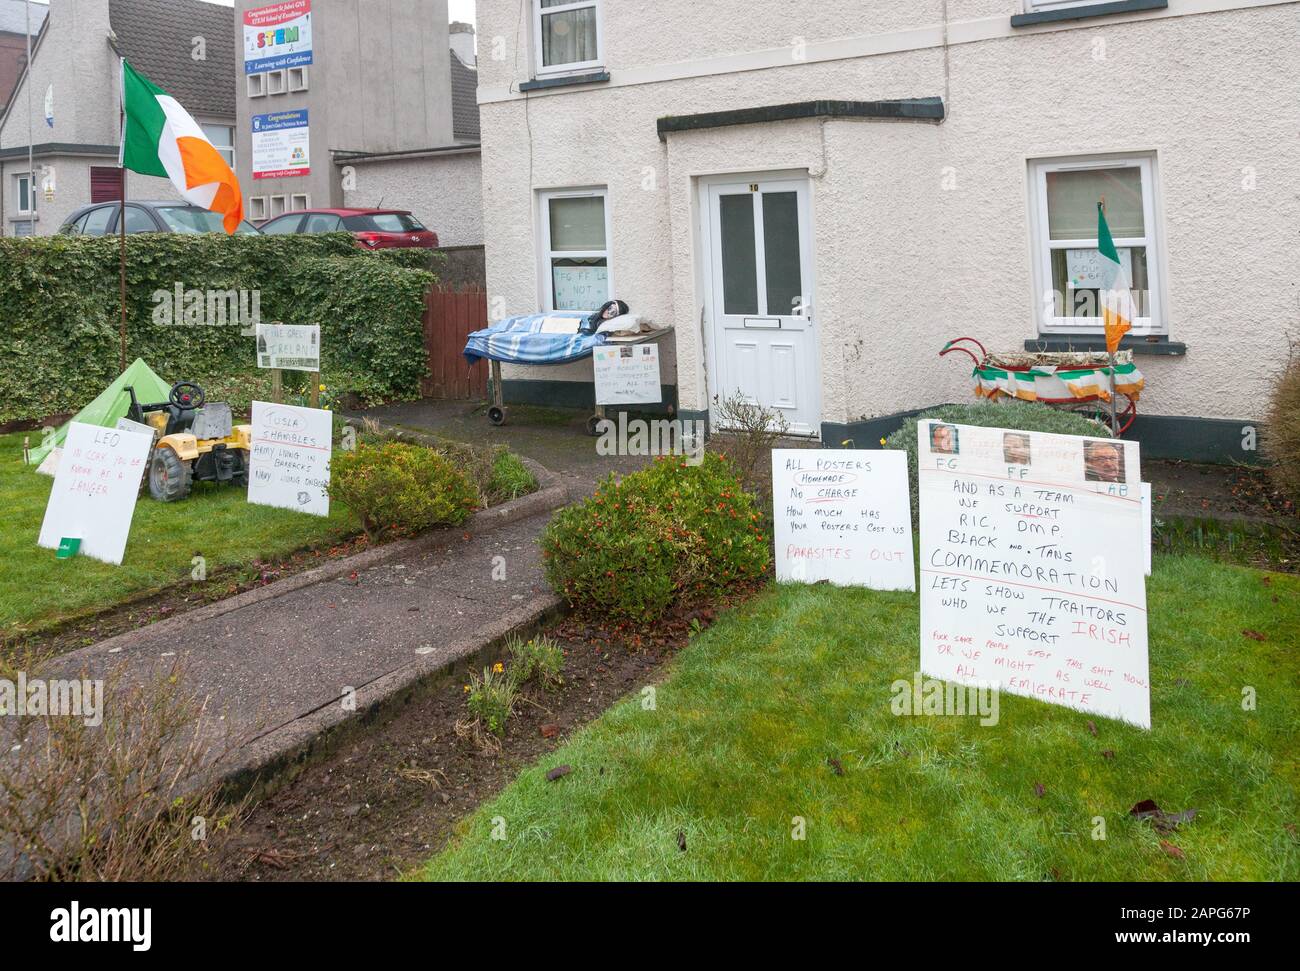 Carrigaline, Cork, Ireland. 23rd January, 2020. One resident voicing their opposition to canvassers and political parties for the forthcoming general election,  by erecting posters and props in their garden that touch on the main issues concerning the voters in Carrigaline, Co. Cork, Ireland. – Credit; David Creedon / Alamy Live News Stock Photo